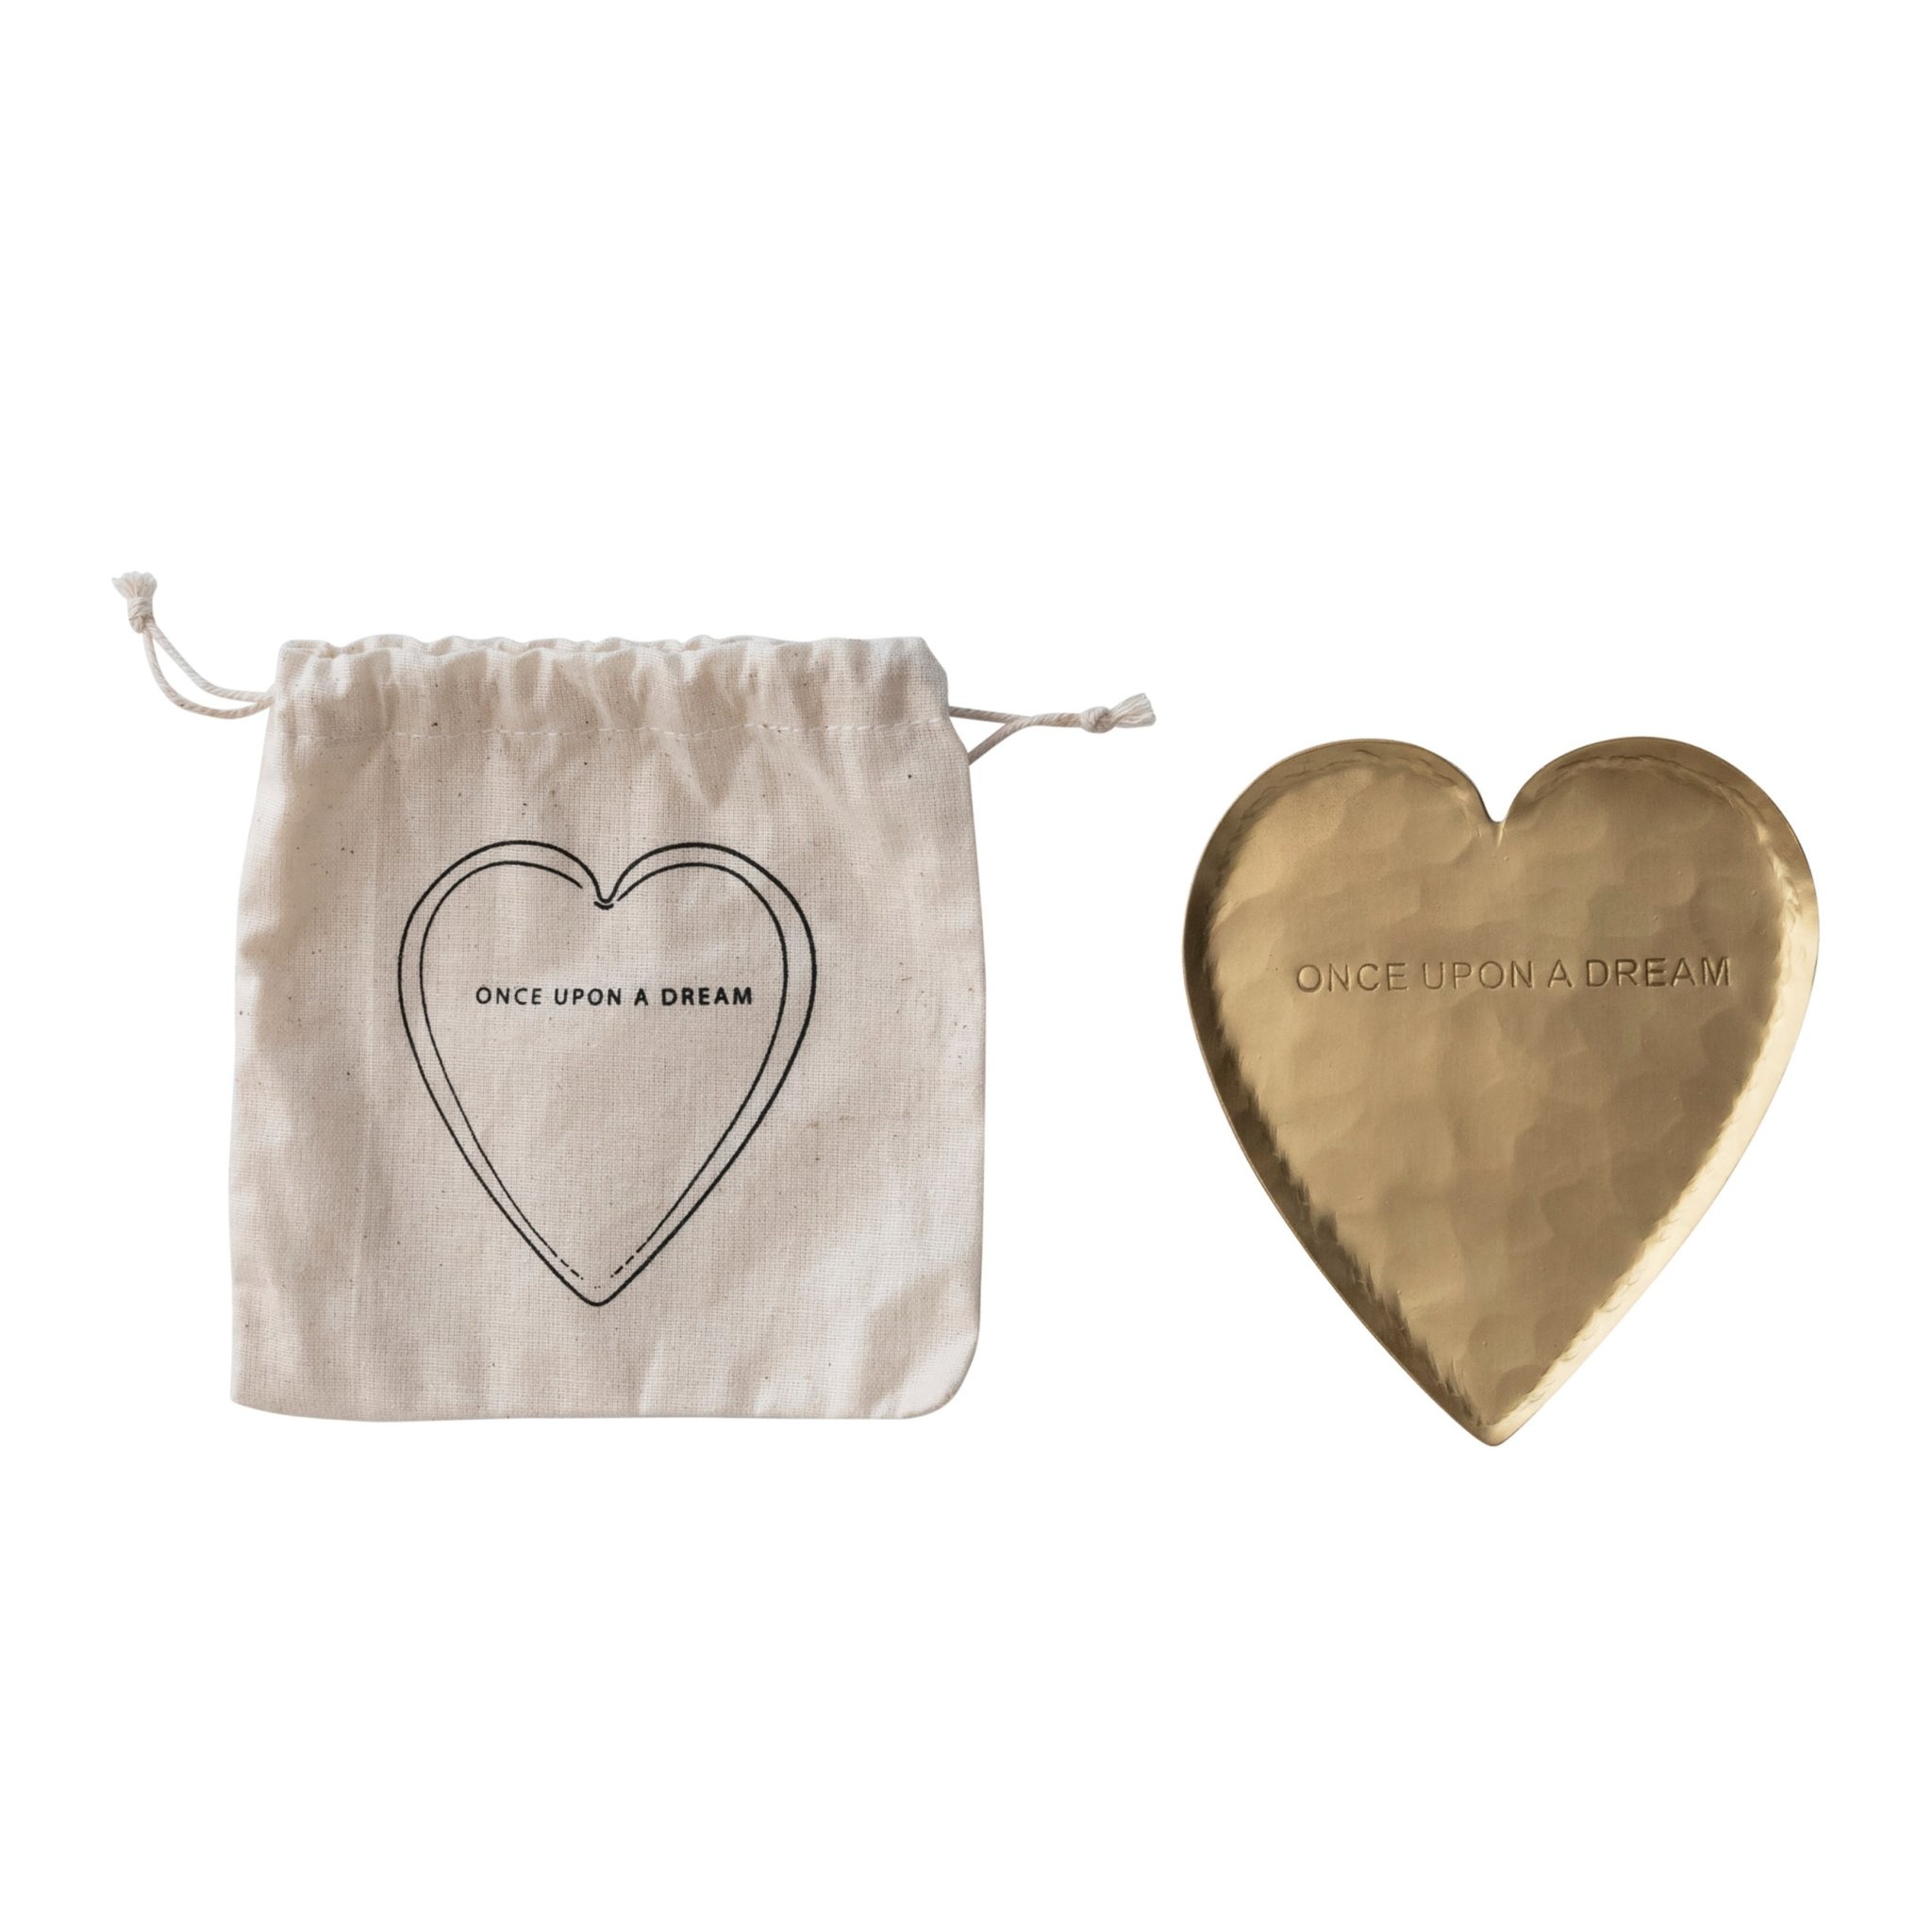 Hammered Brass Heart Shaped Dish with Engraved "Once Upon A Dream"